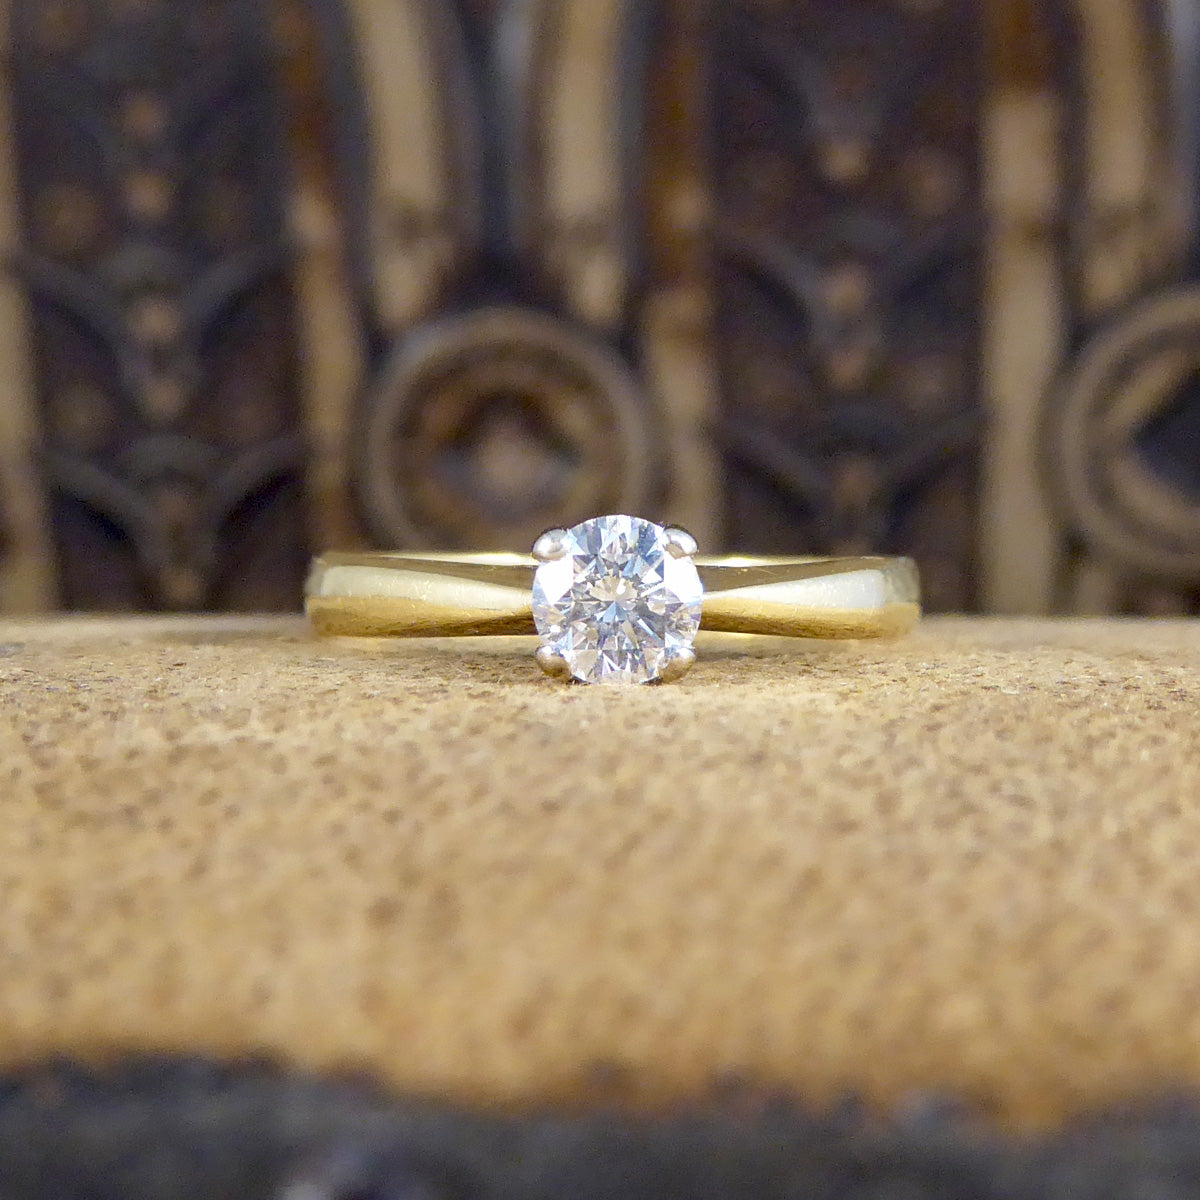 Classic and Dainty 0.25ct Diamond Solitaire Engagement Ring in 18ct Yellow Gold